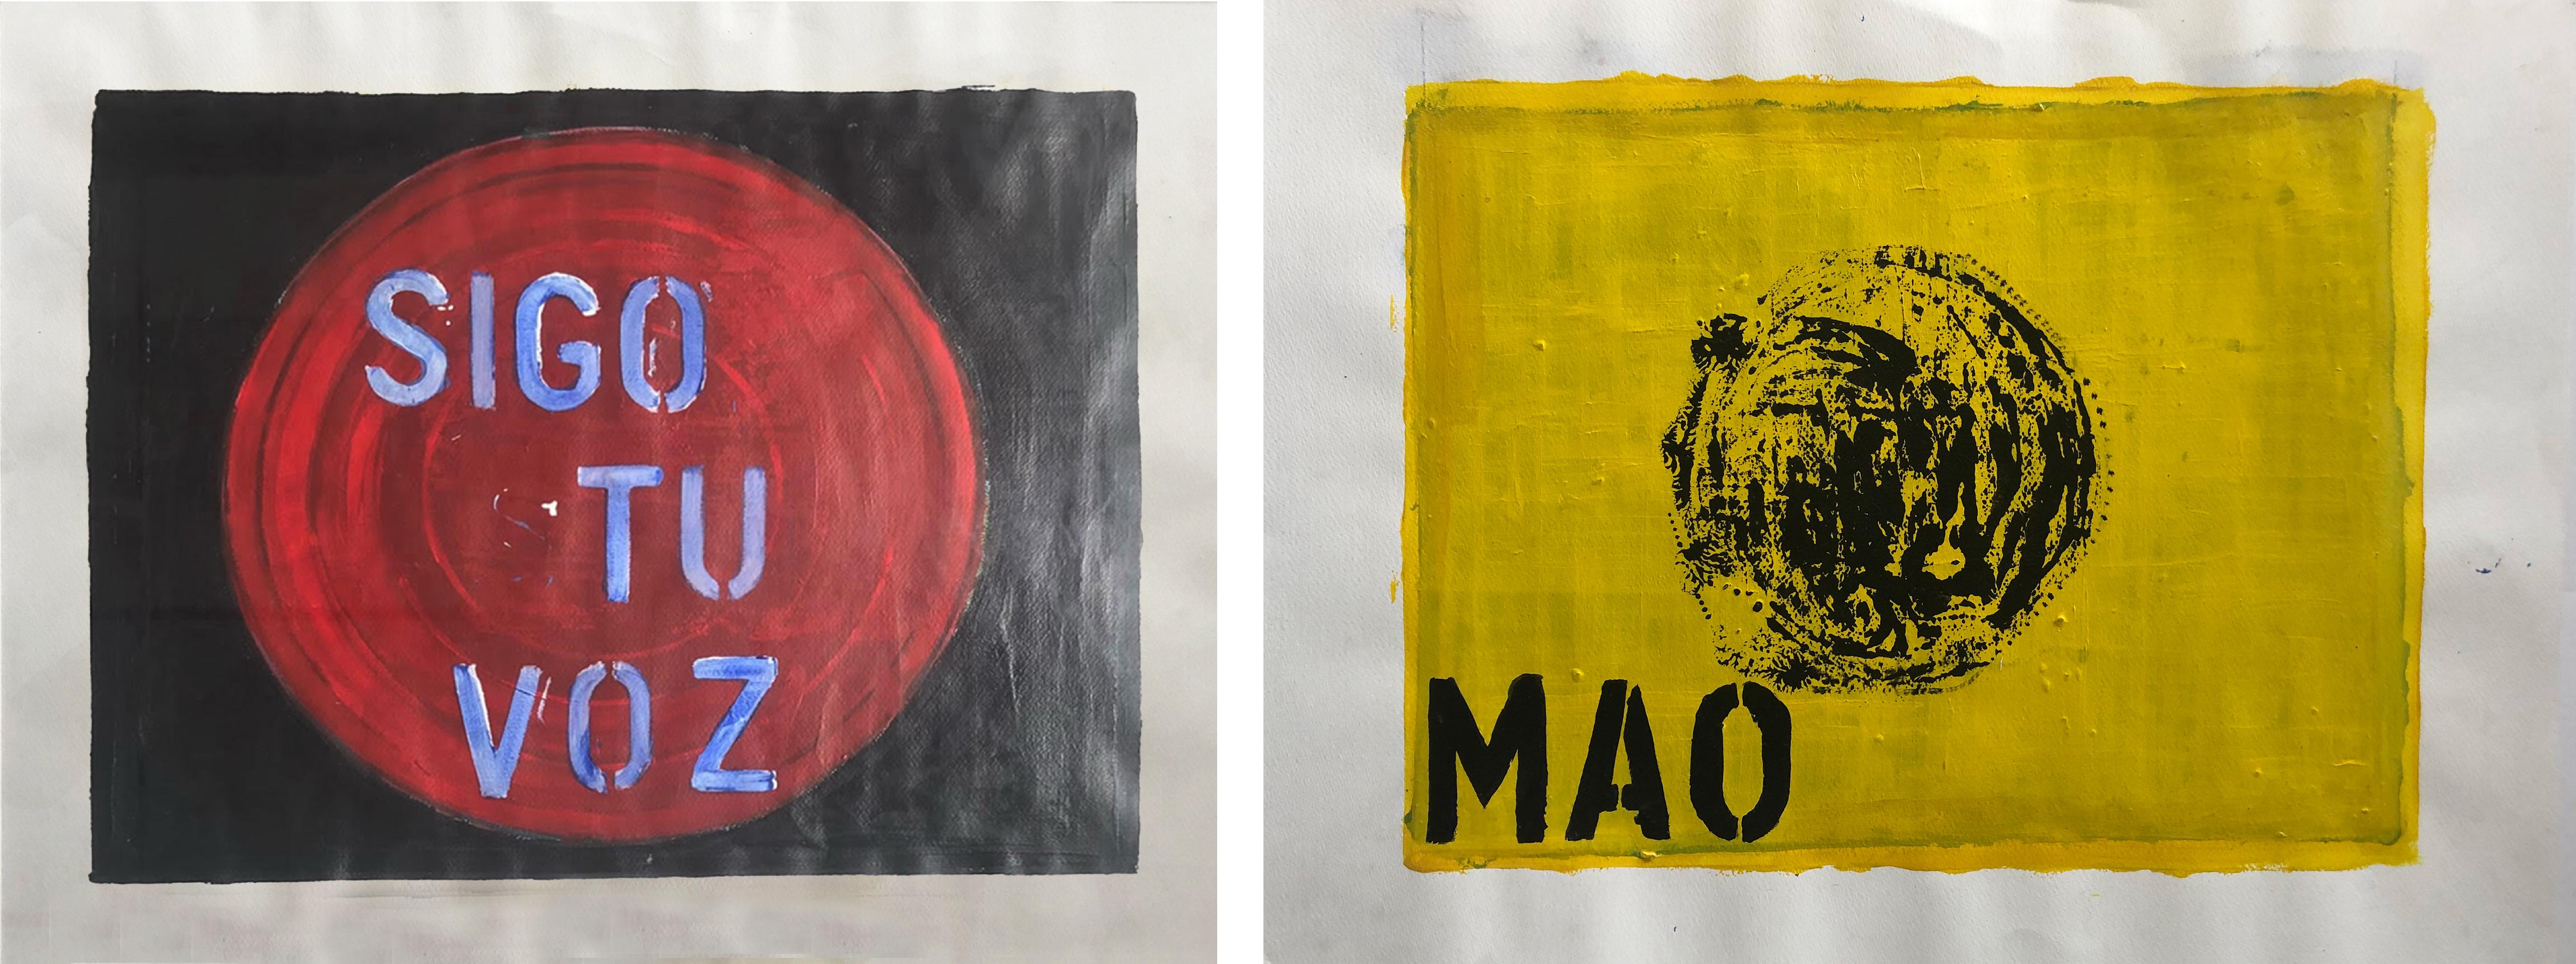 Sigo tu voz and Mao. Paintings, Diptych. From the Chaleco Quimico series